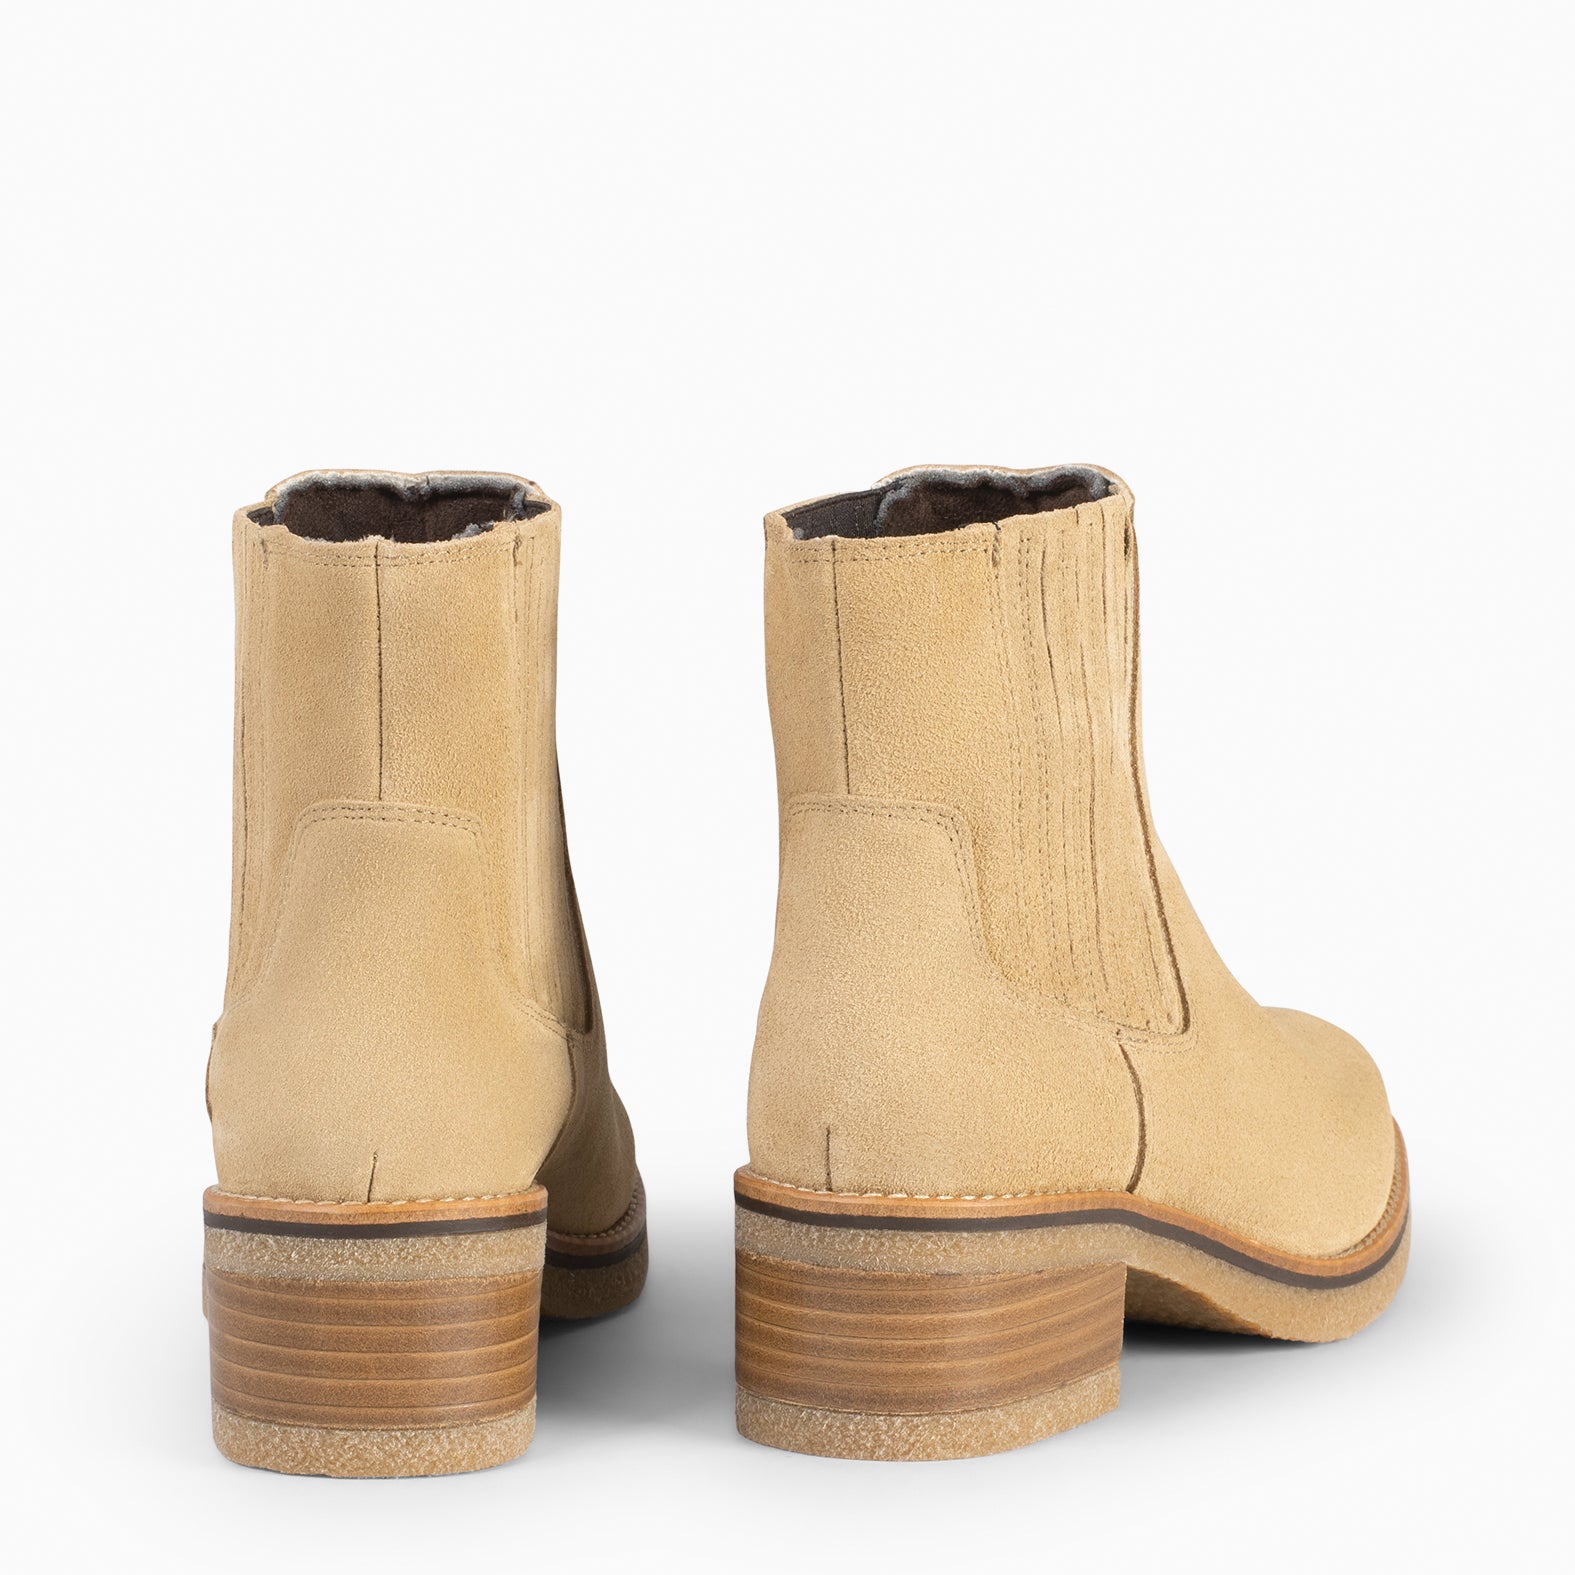 COUNTRY - BEIGE Country Women Booties 